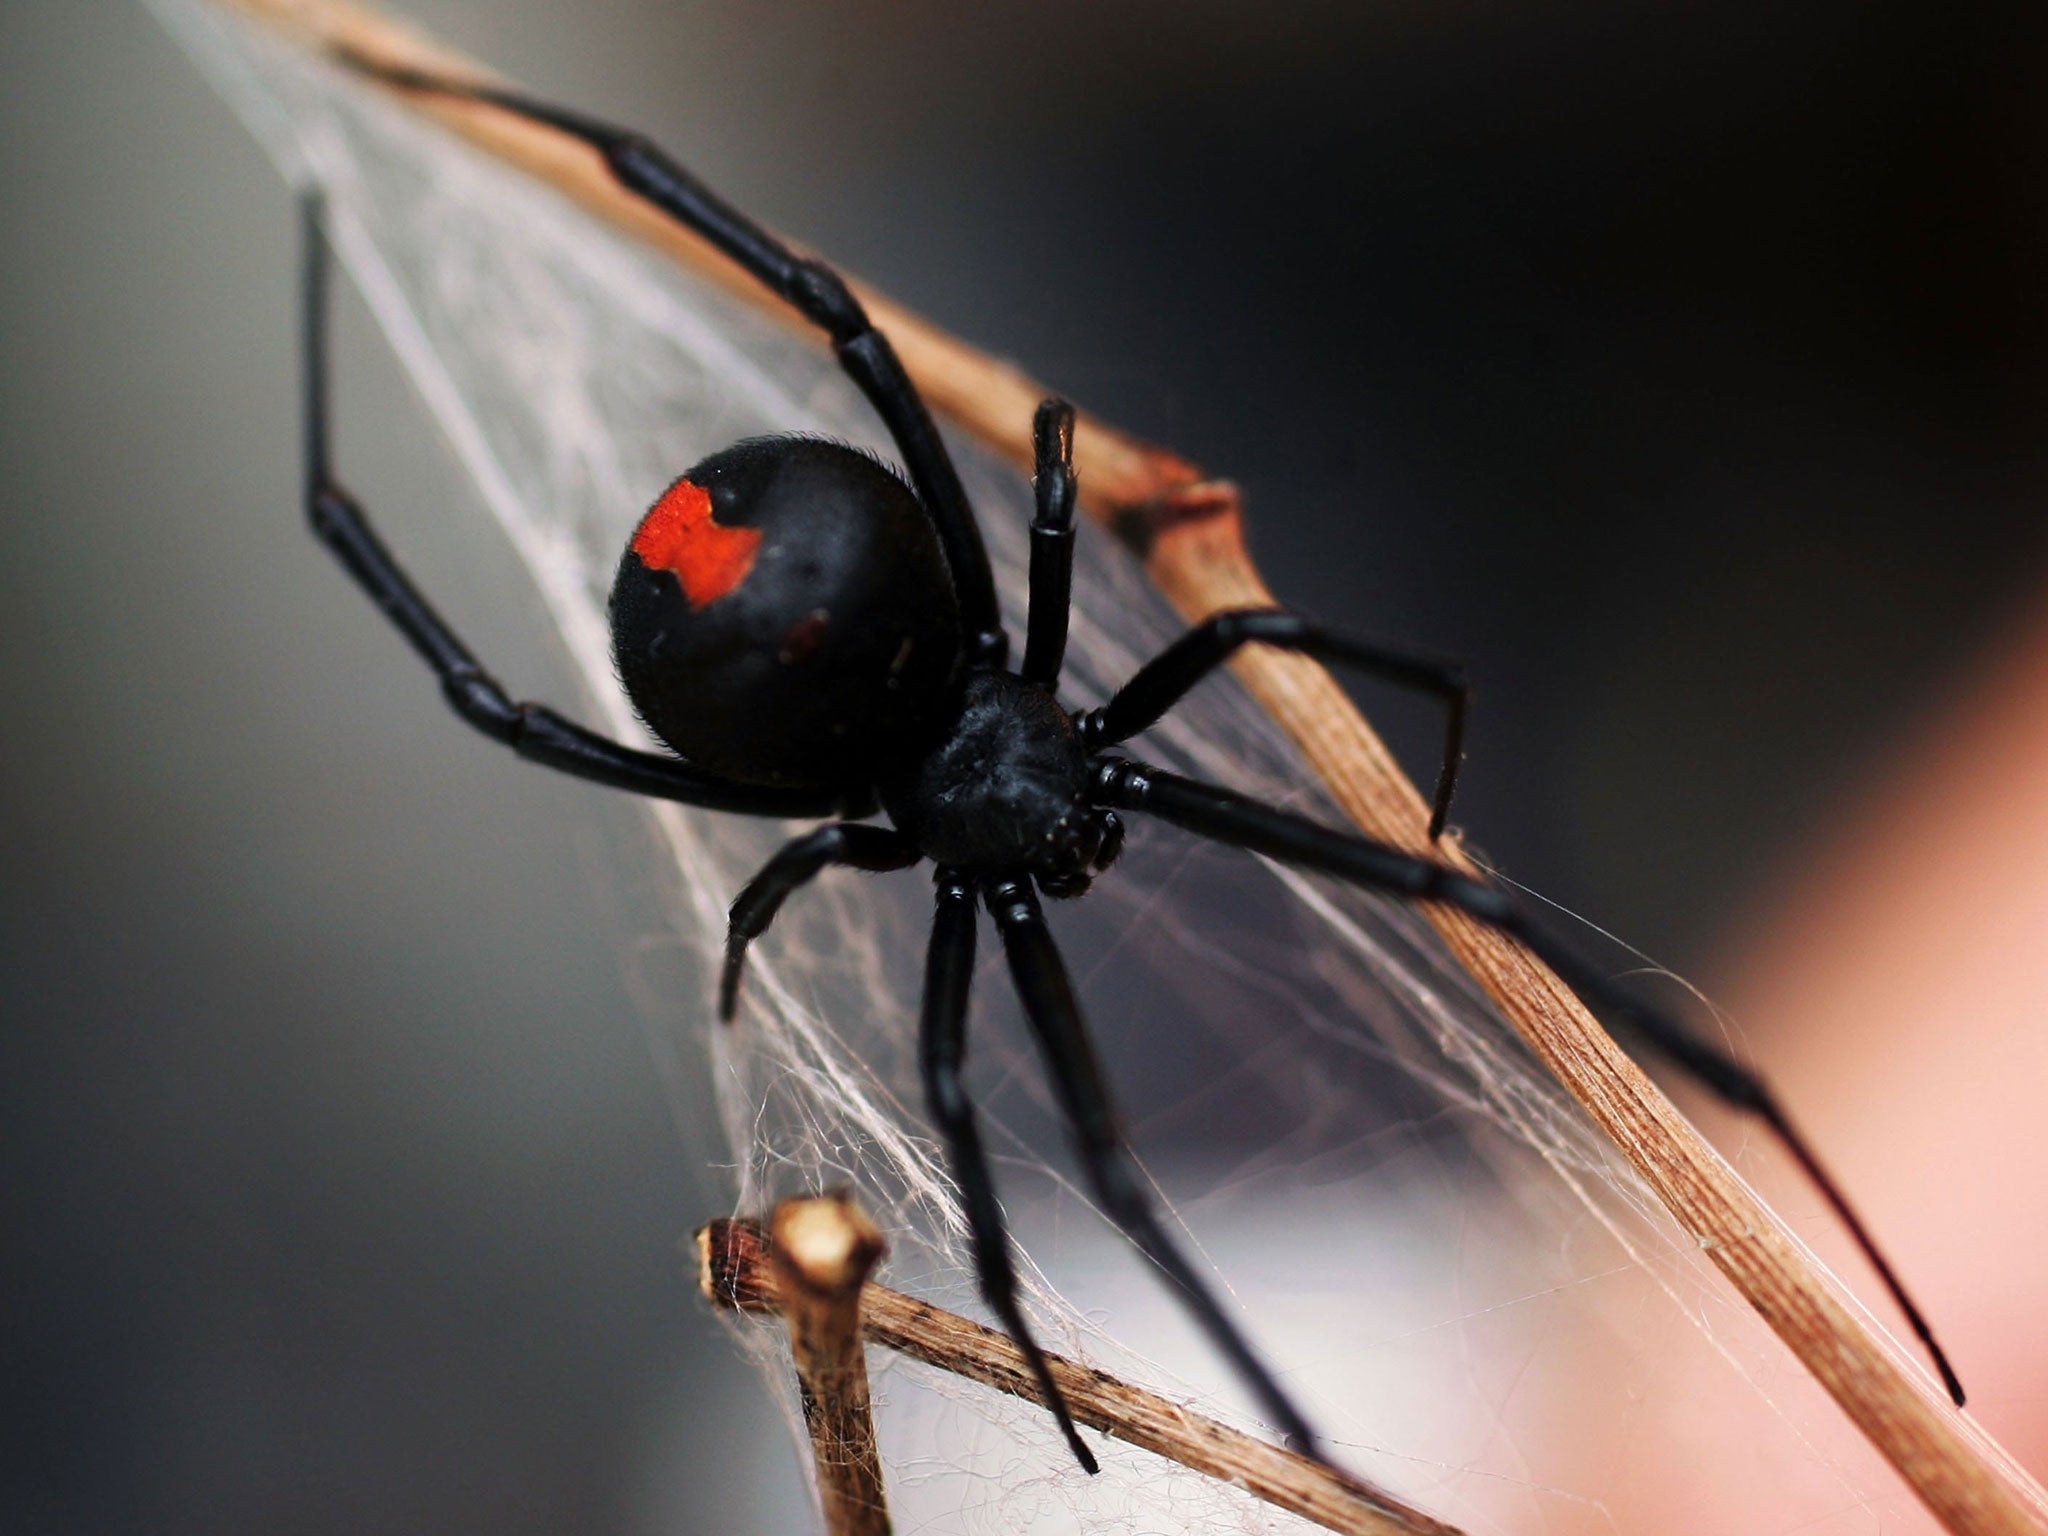 Three young children hospitalised after trying to gain Spider-Man  superpowers from black widow spider bite | The Independent | The Independent